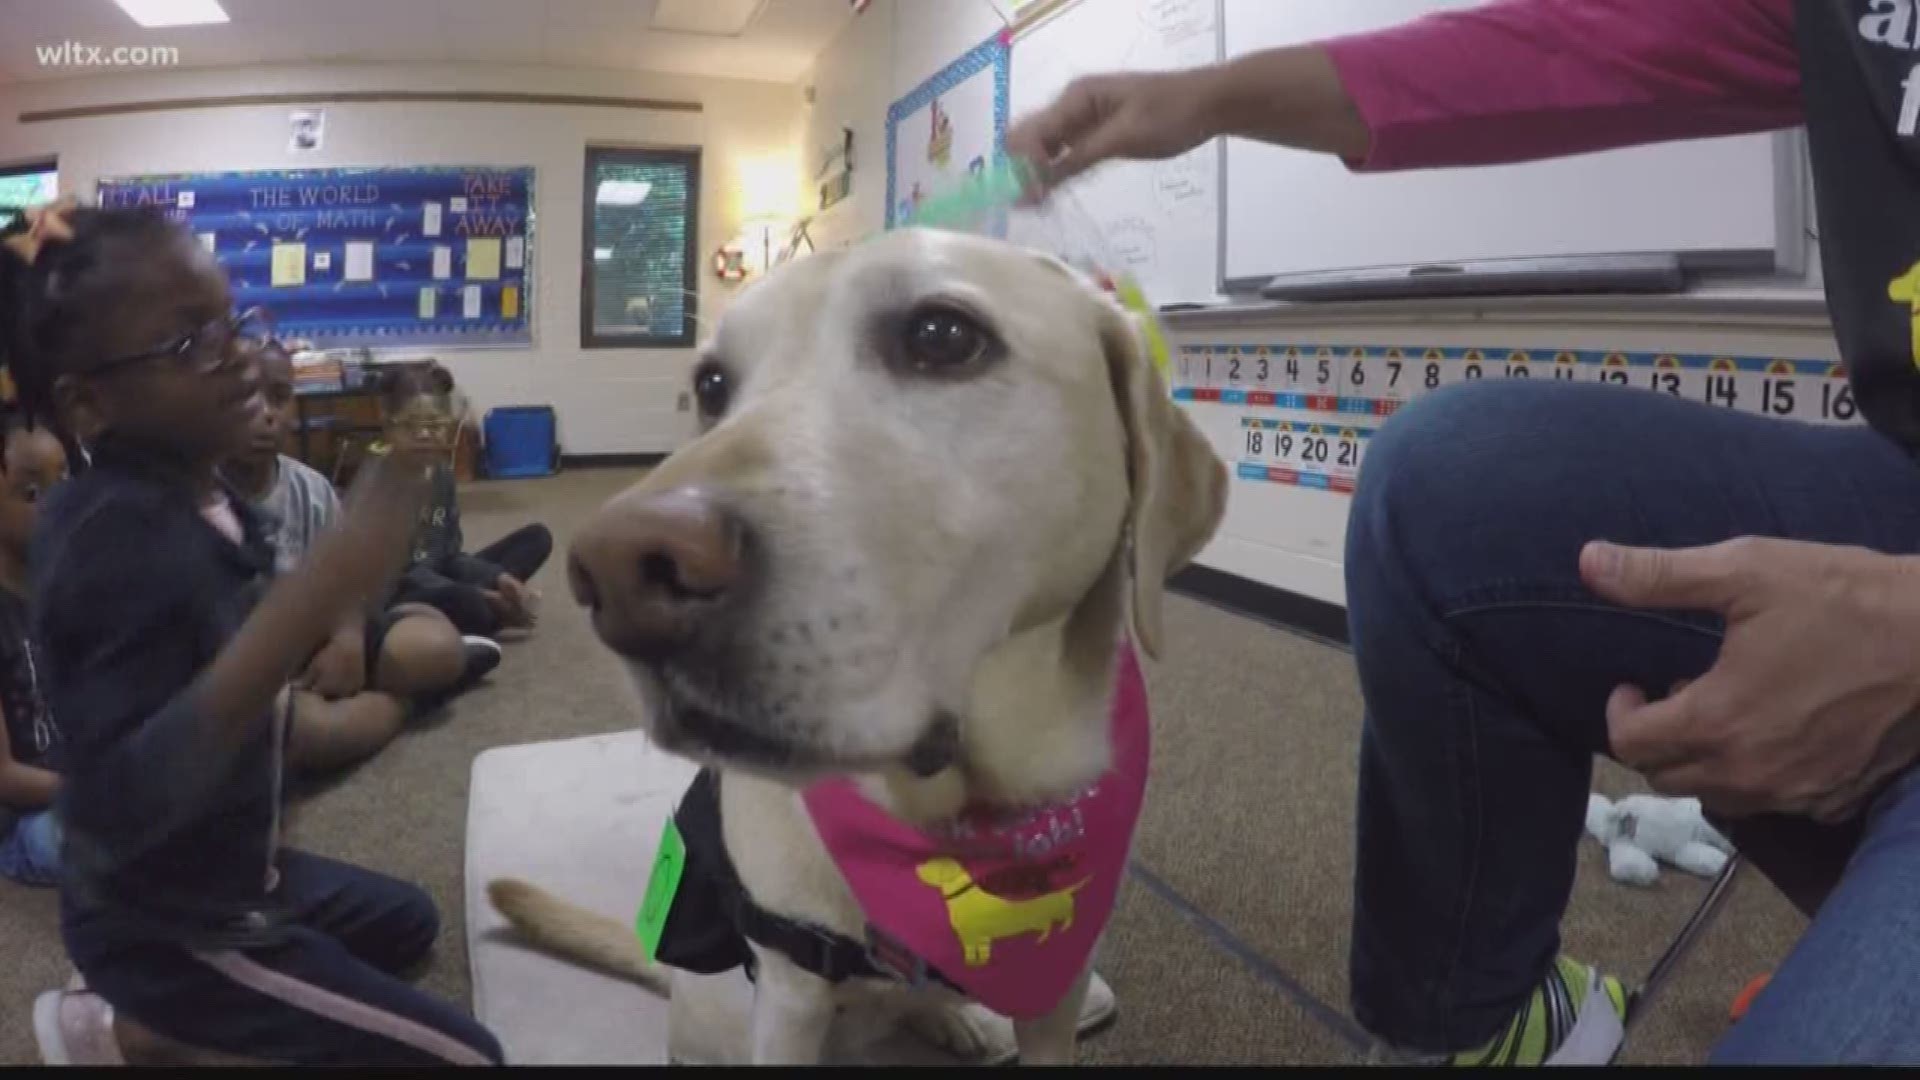 This school dog is about to turn 9-year-old, and she's already retiring.